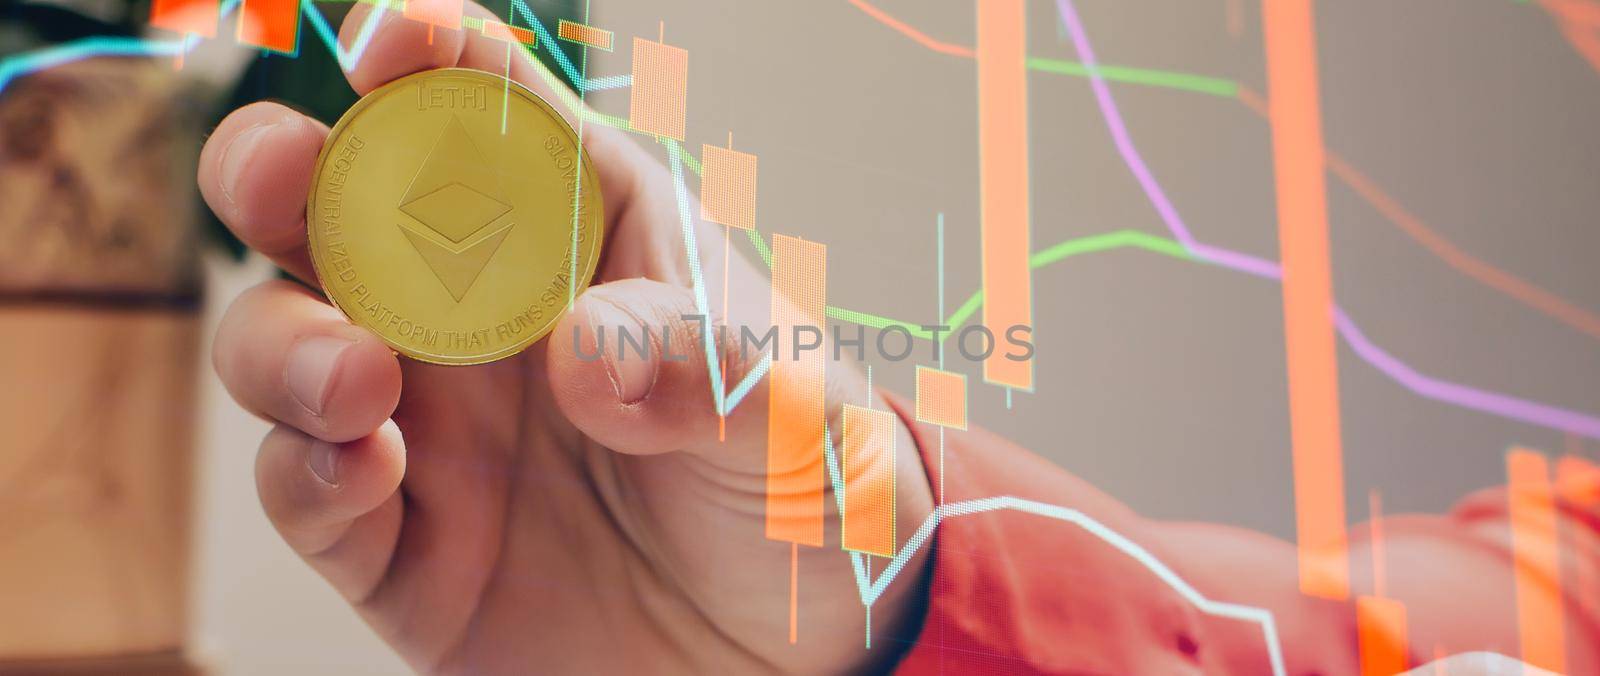 Bitcoins with Candle stick graph chart and digital background. Mining or block chain technology. by Maximusnd